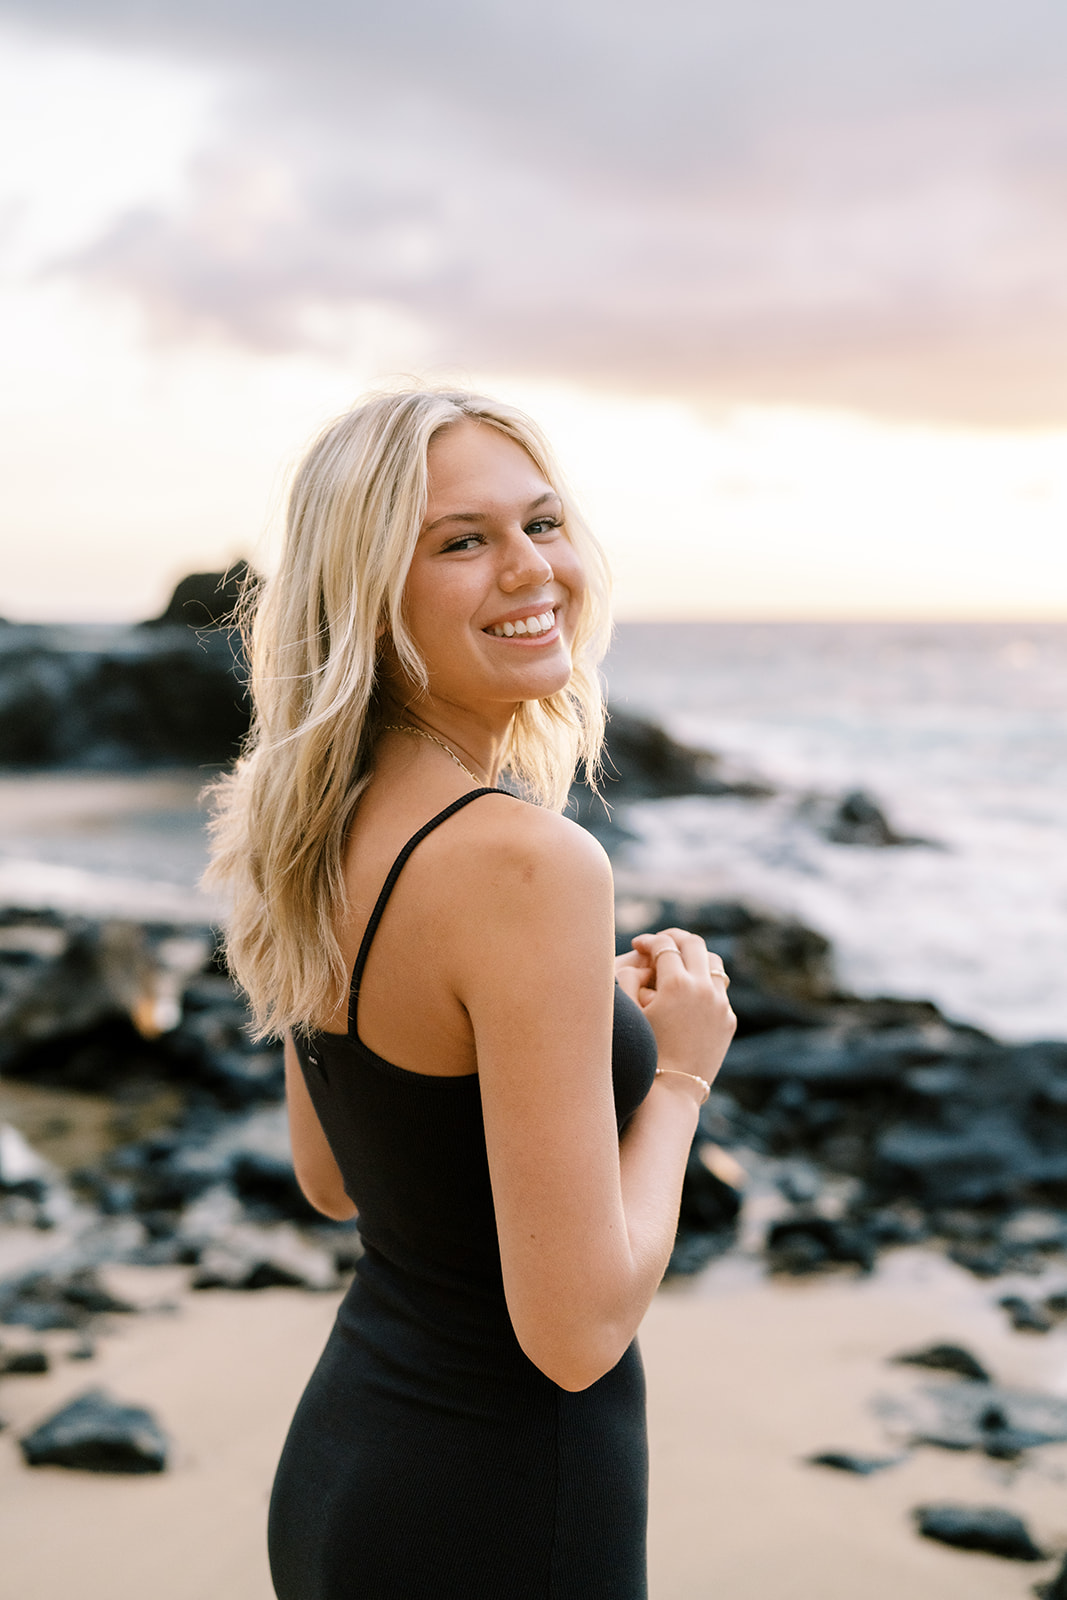 Young woman smiling on the beach at sunrise, captured by Hawaii senior portrait photographer Megan Moura.